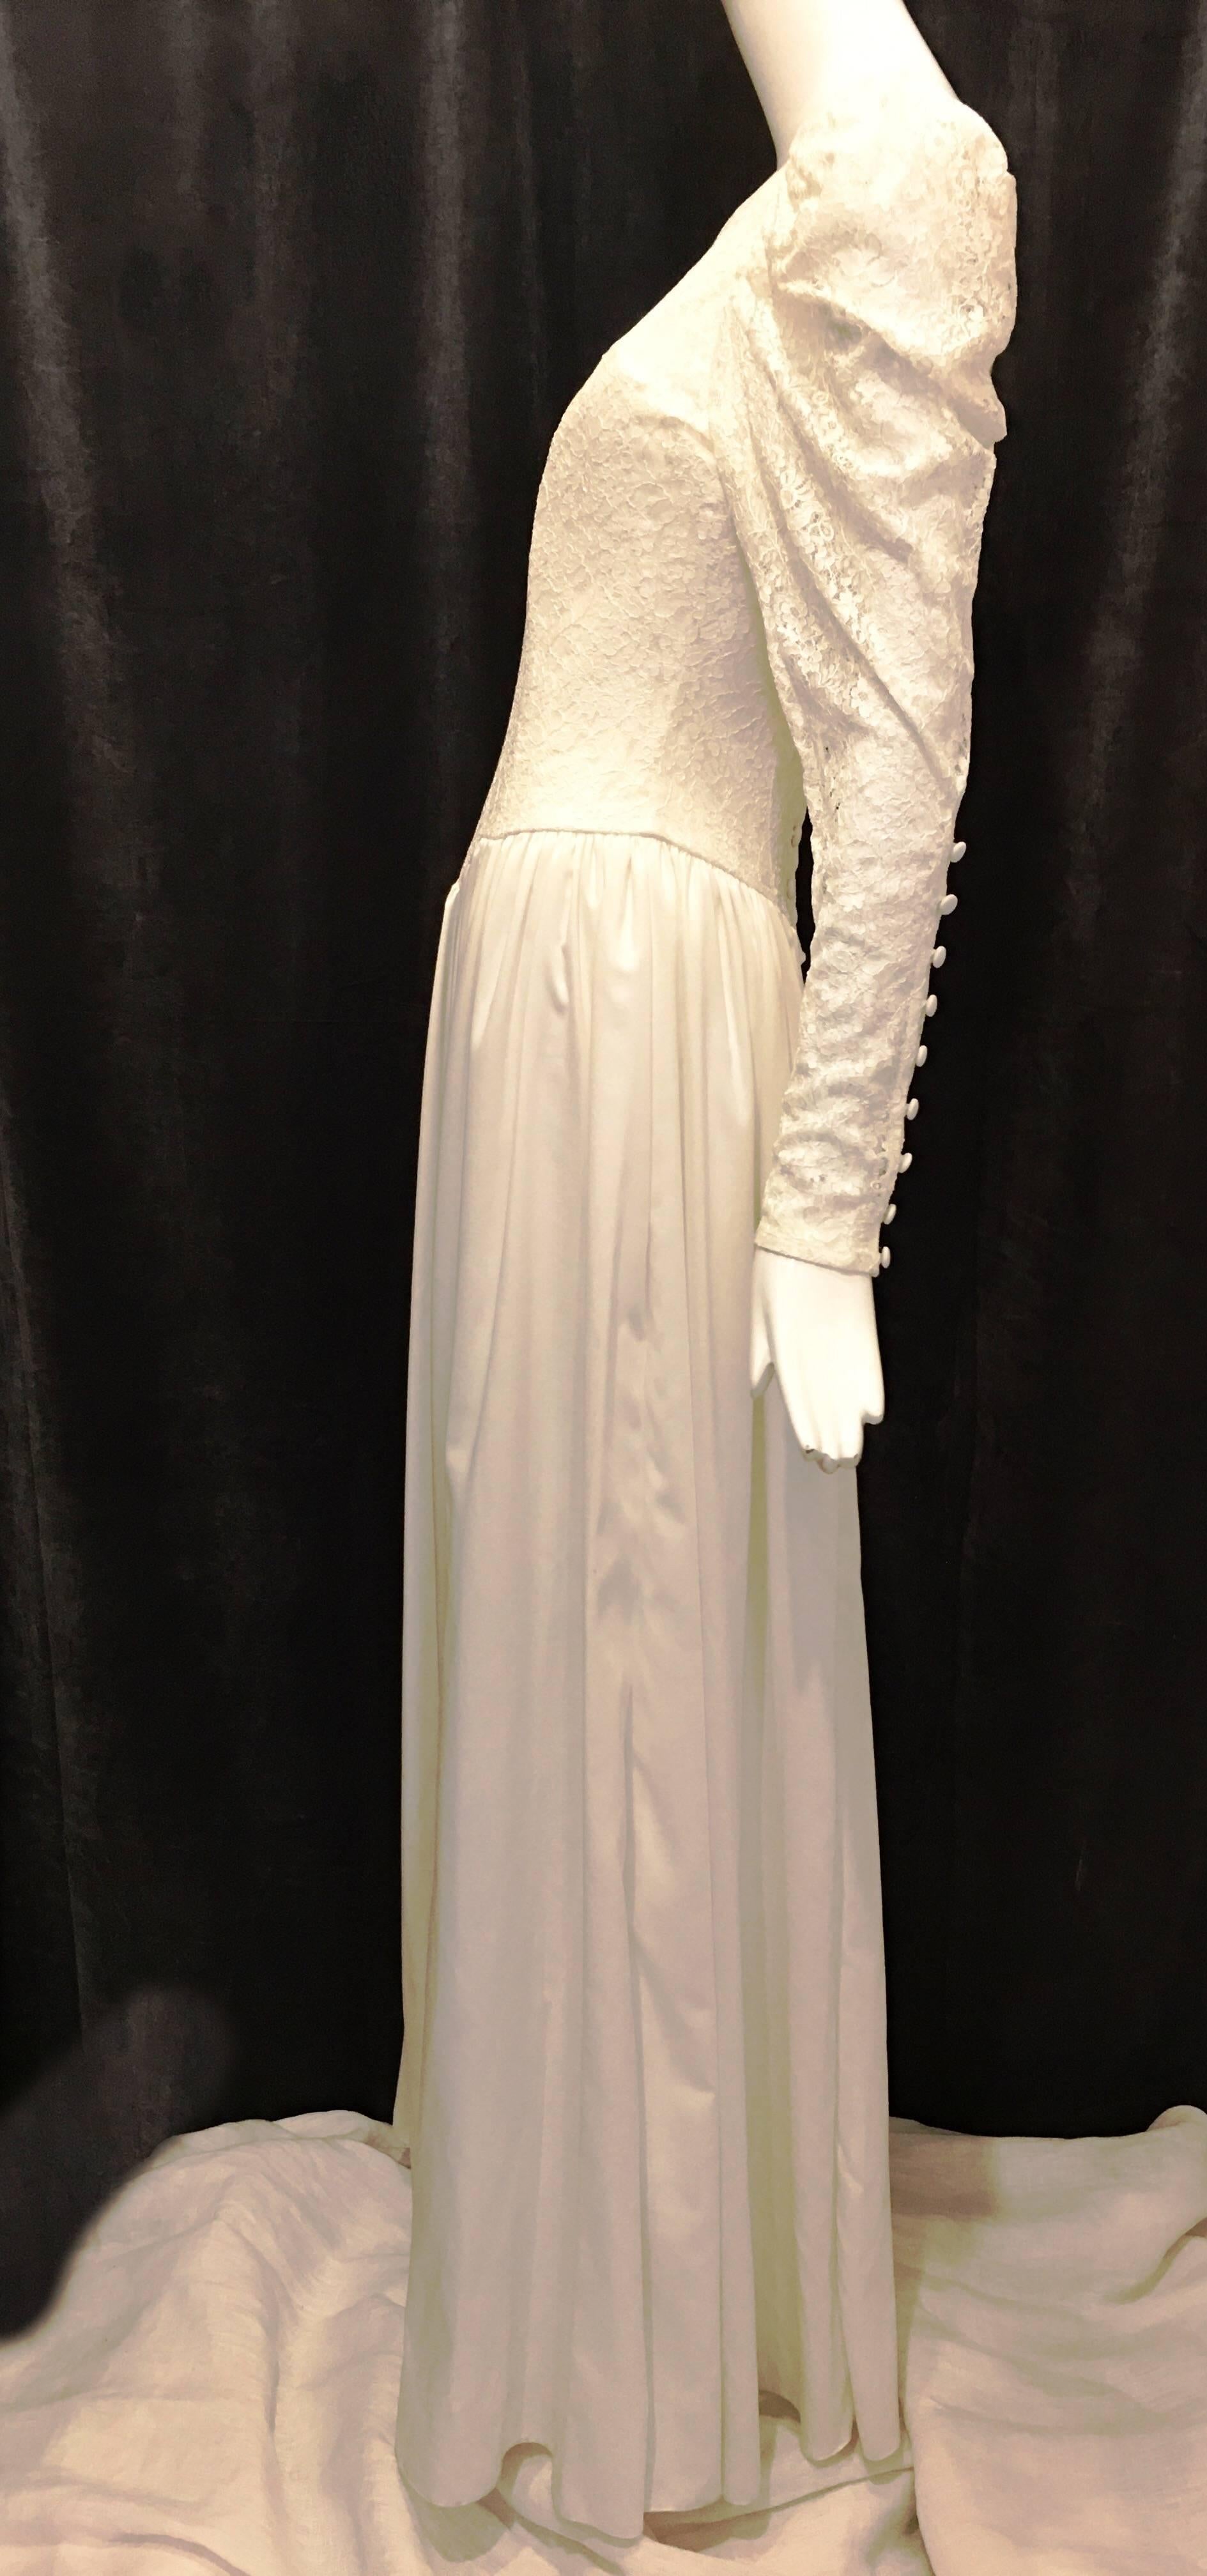 Lace bodice wedding dress with sheer lace arms and princess sleeves. 9 functional buttons at wrists of sleeves. 7 buttons at back of dress. Back is v cut above the buttons. Strapless ribbed bodice beneath lace at front of dress. Neckline slightly